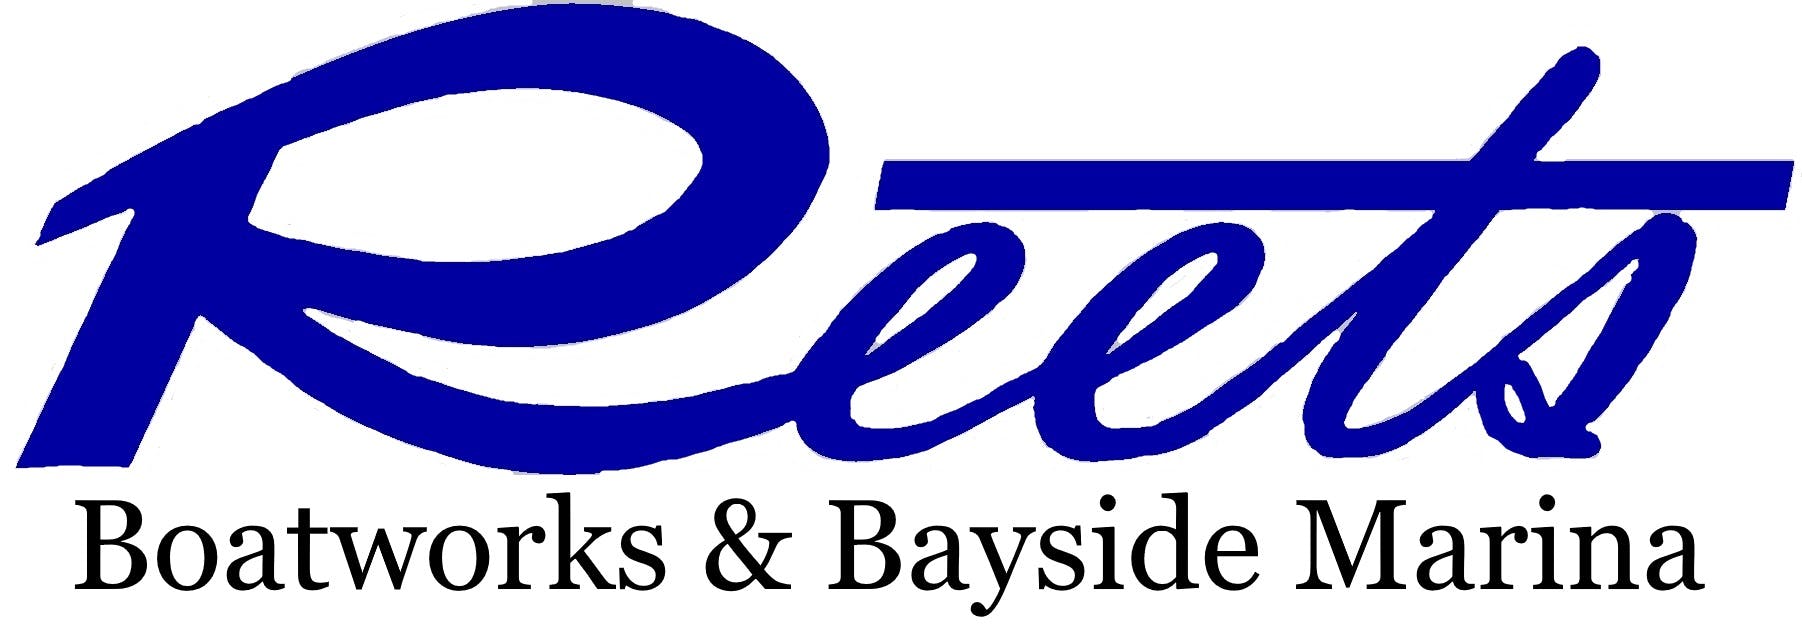 Company logo for 'Reets Boatworks - Mayfield'.